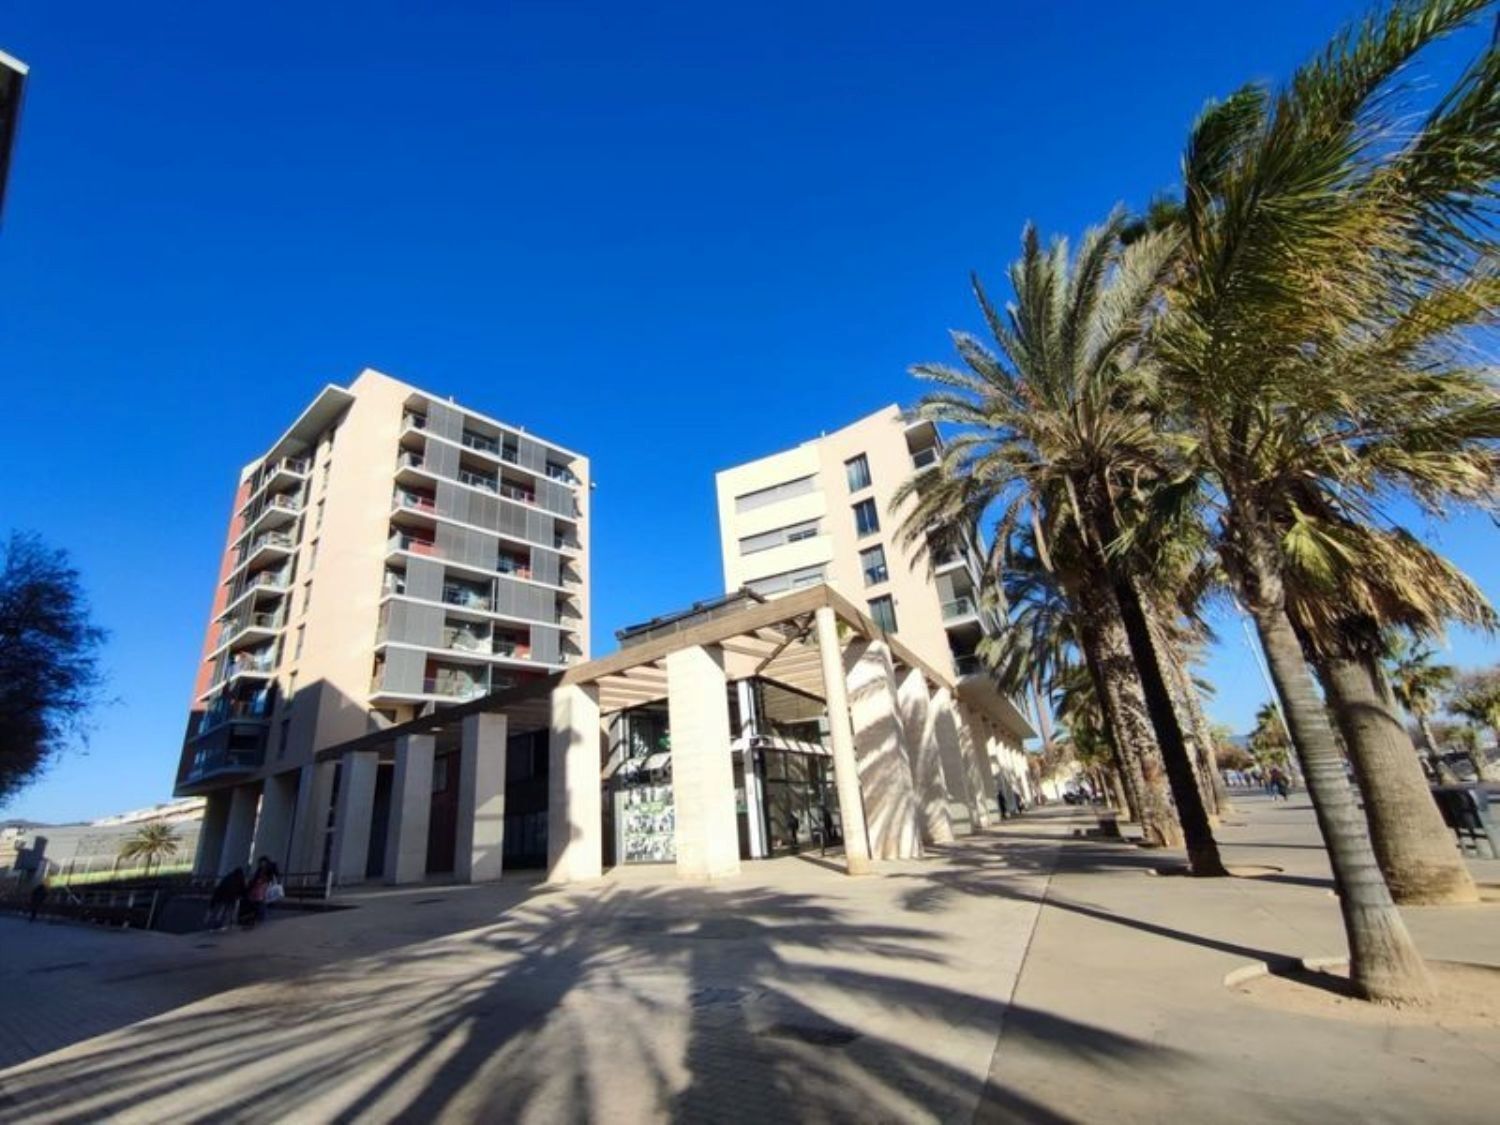 Apartment for sale on the seafront on the Paseo Maritimo, in Badalona